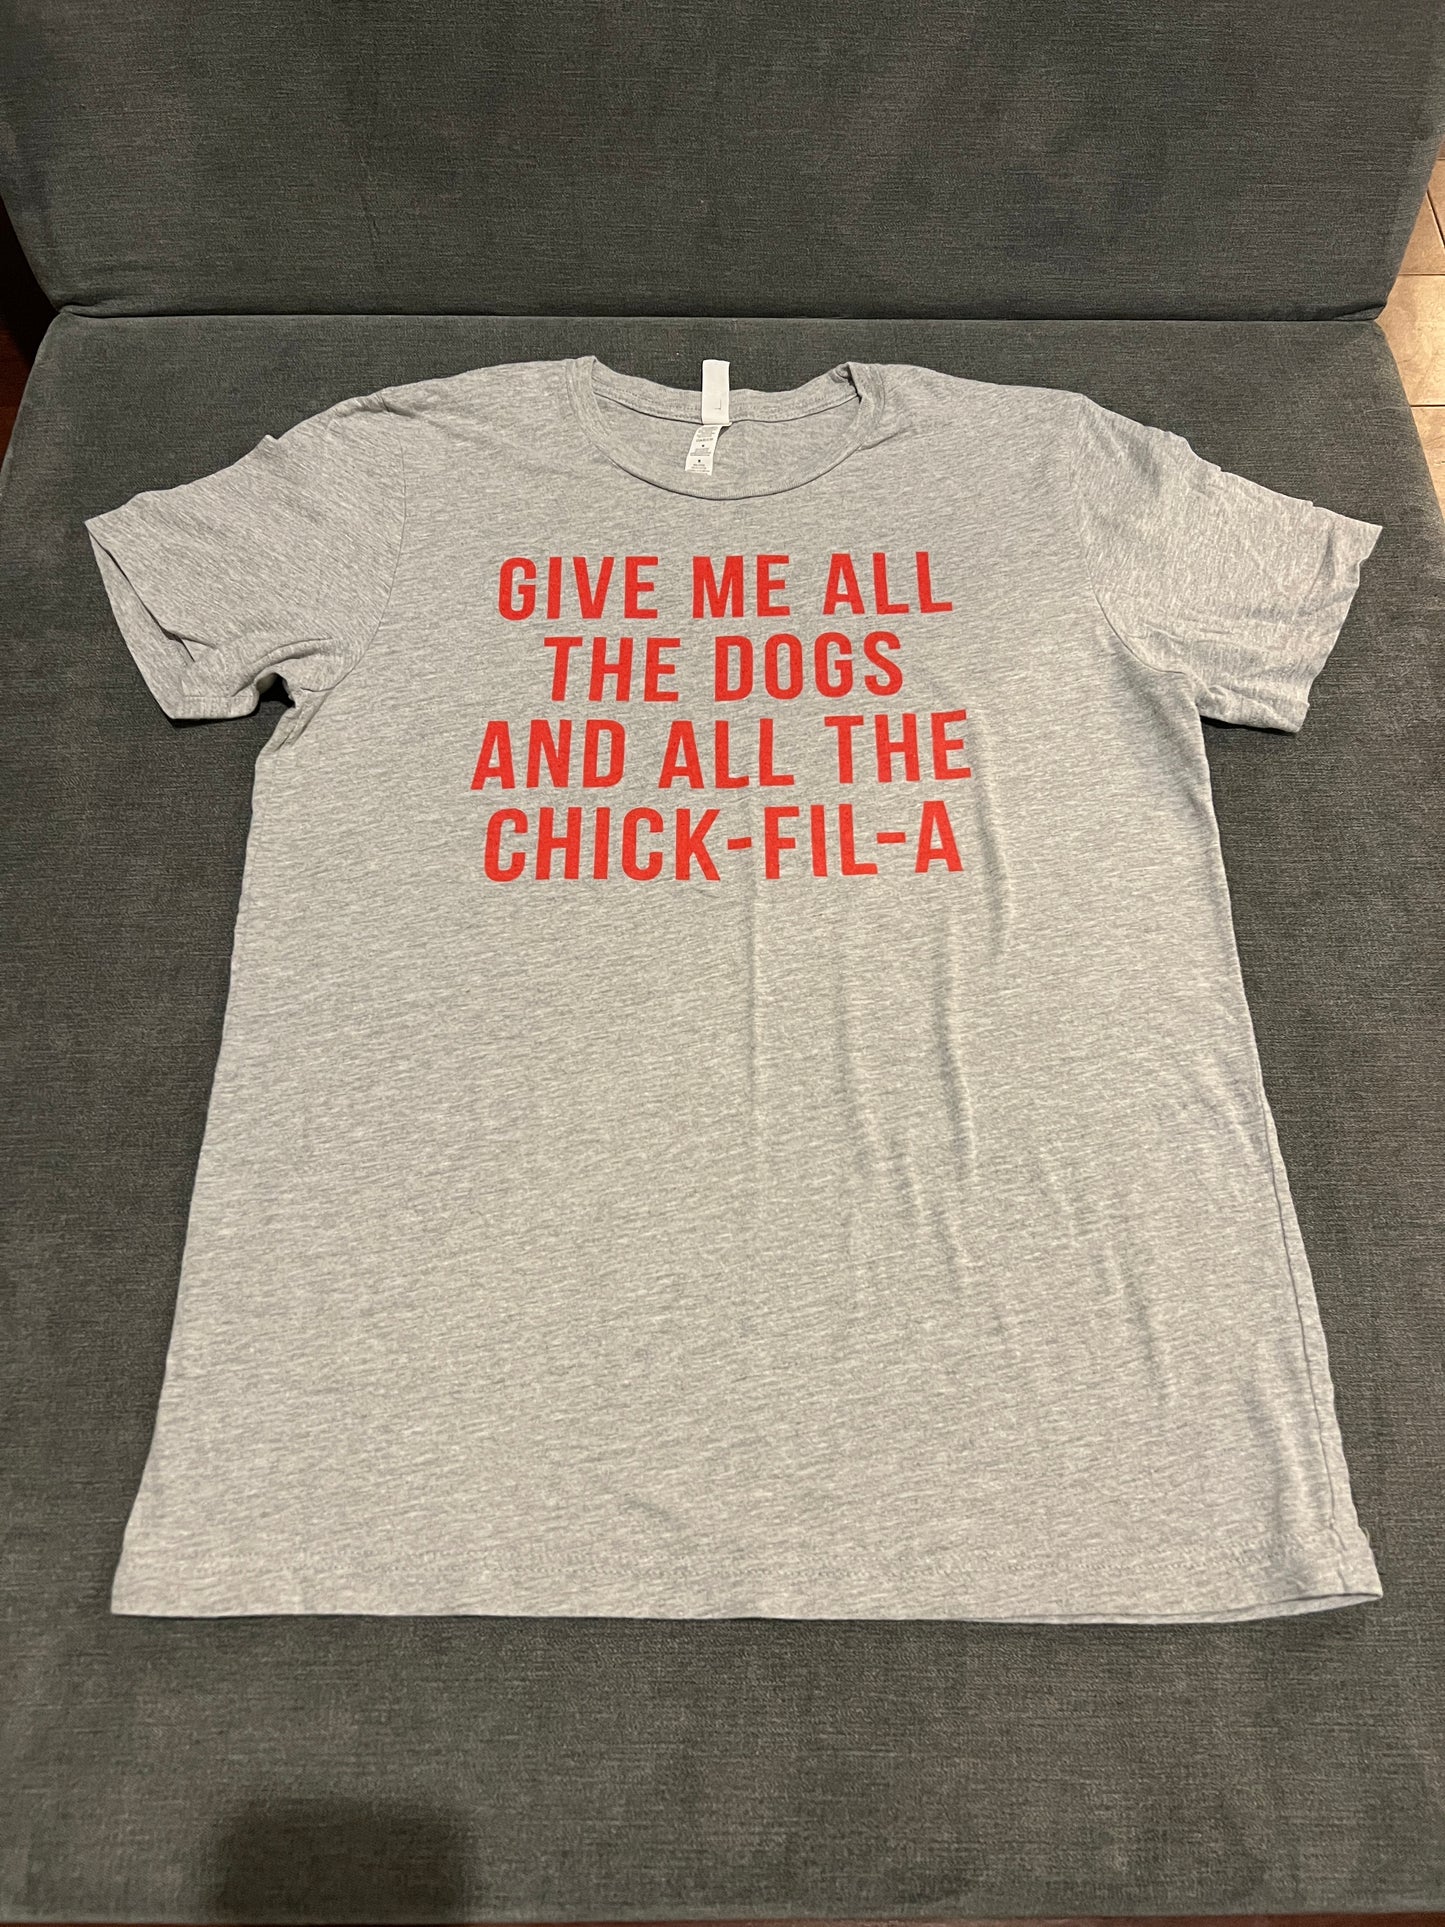 Women's M Dogs and Chick-Fil-A Grey Tshirt- PPU 45044 (Liberty Twp)